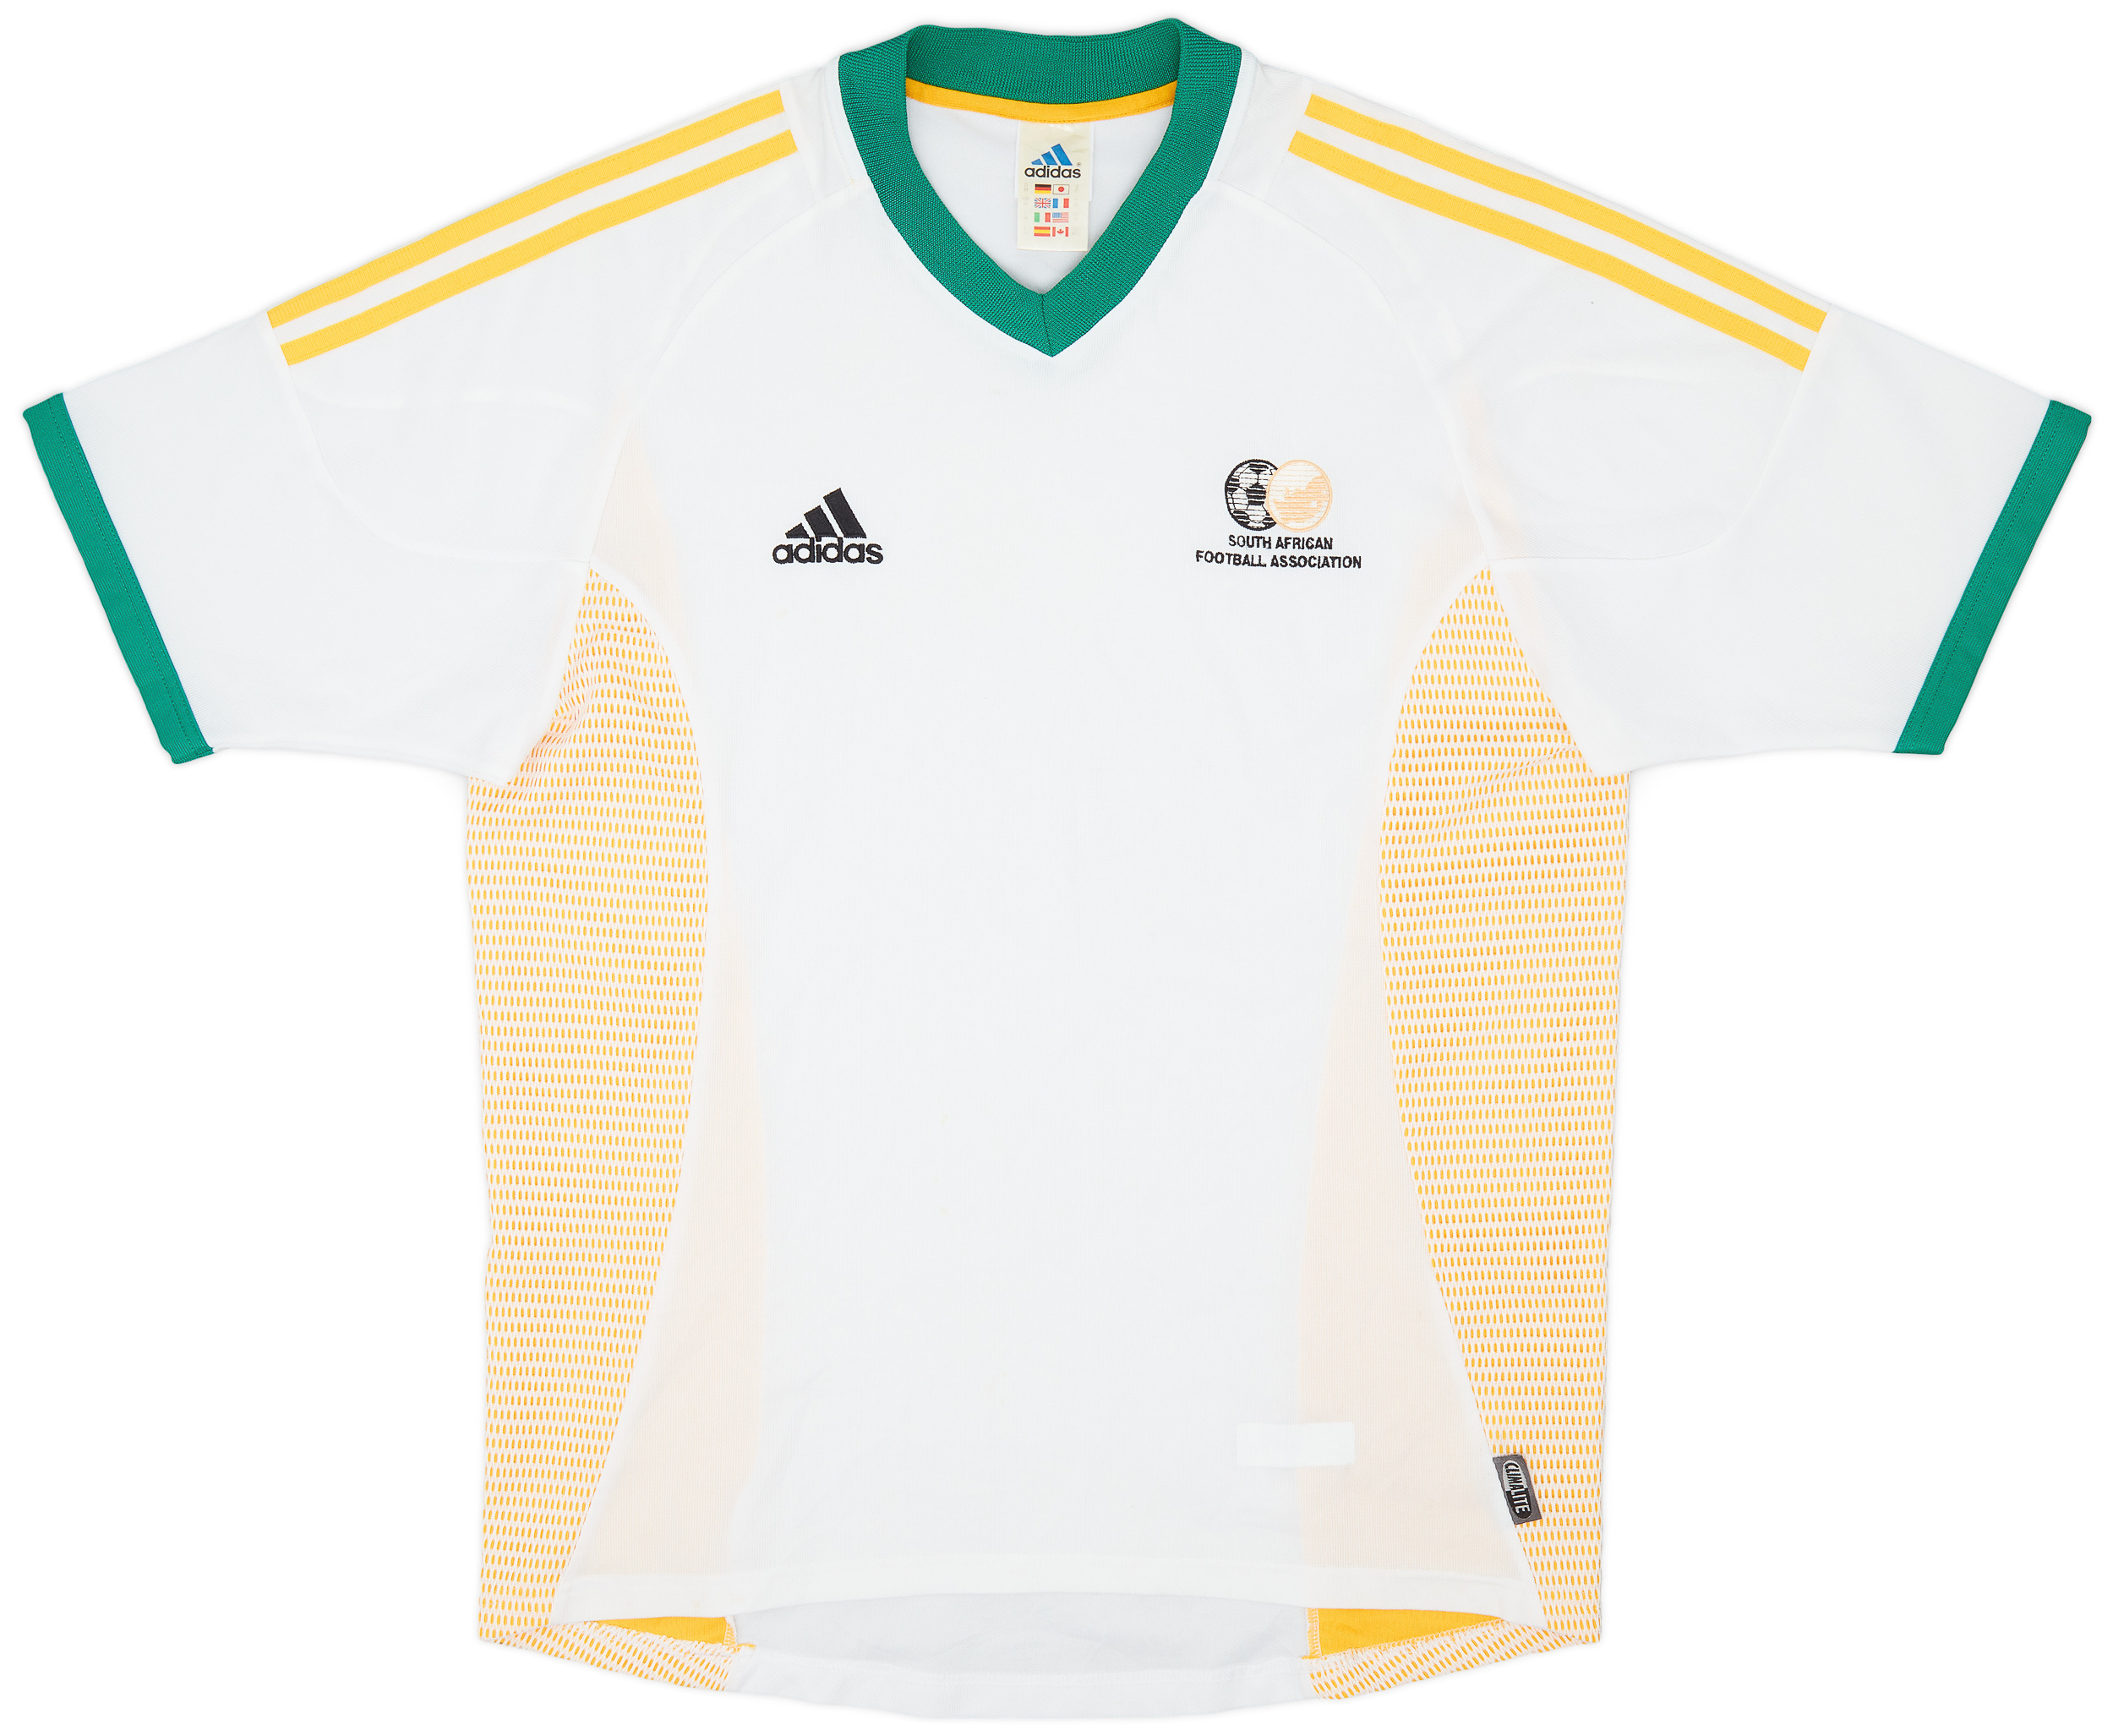 2002-04 South Africa Home Shirt - 8/10 - ()